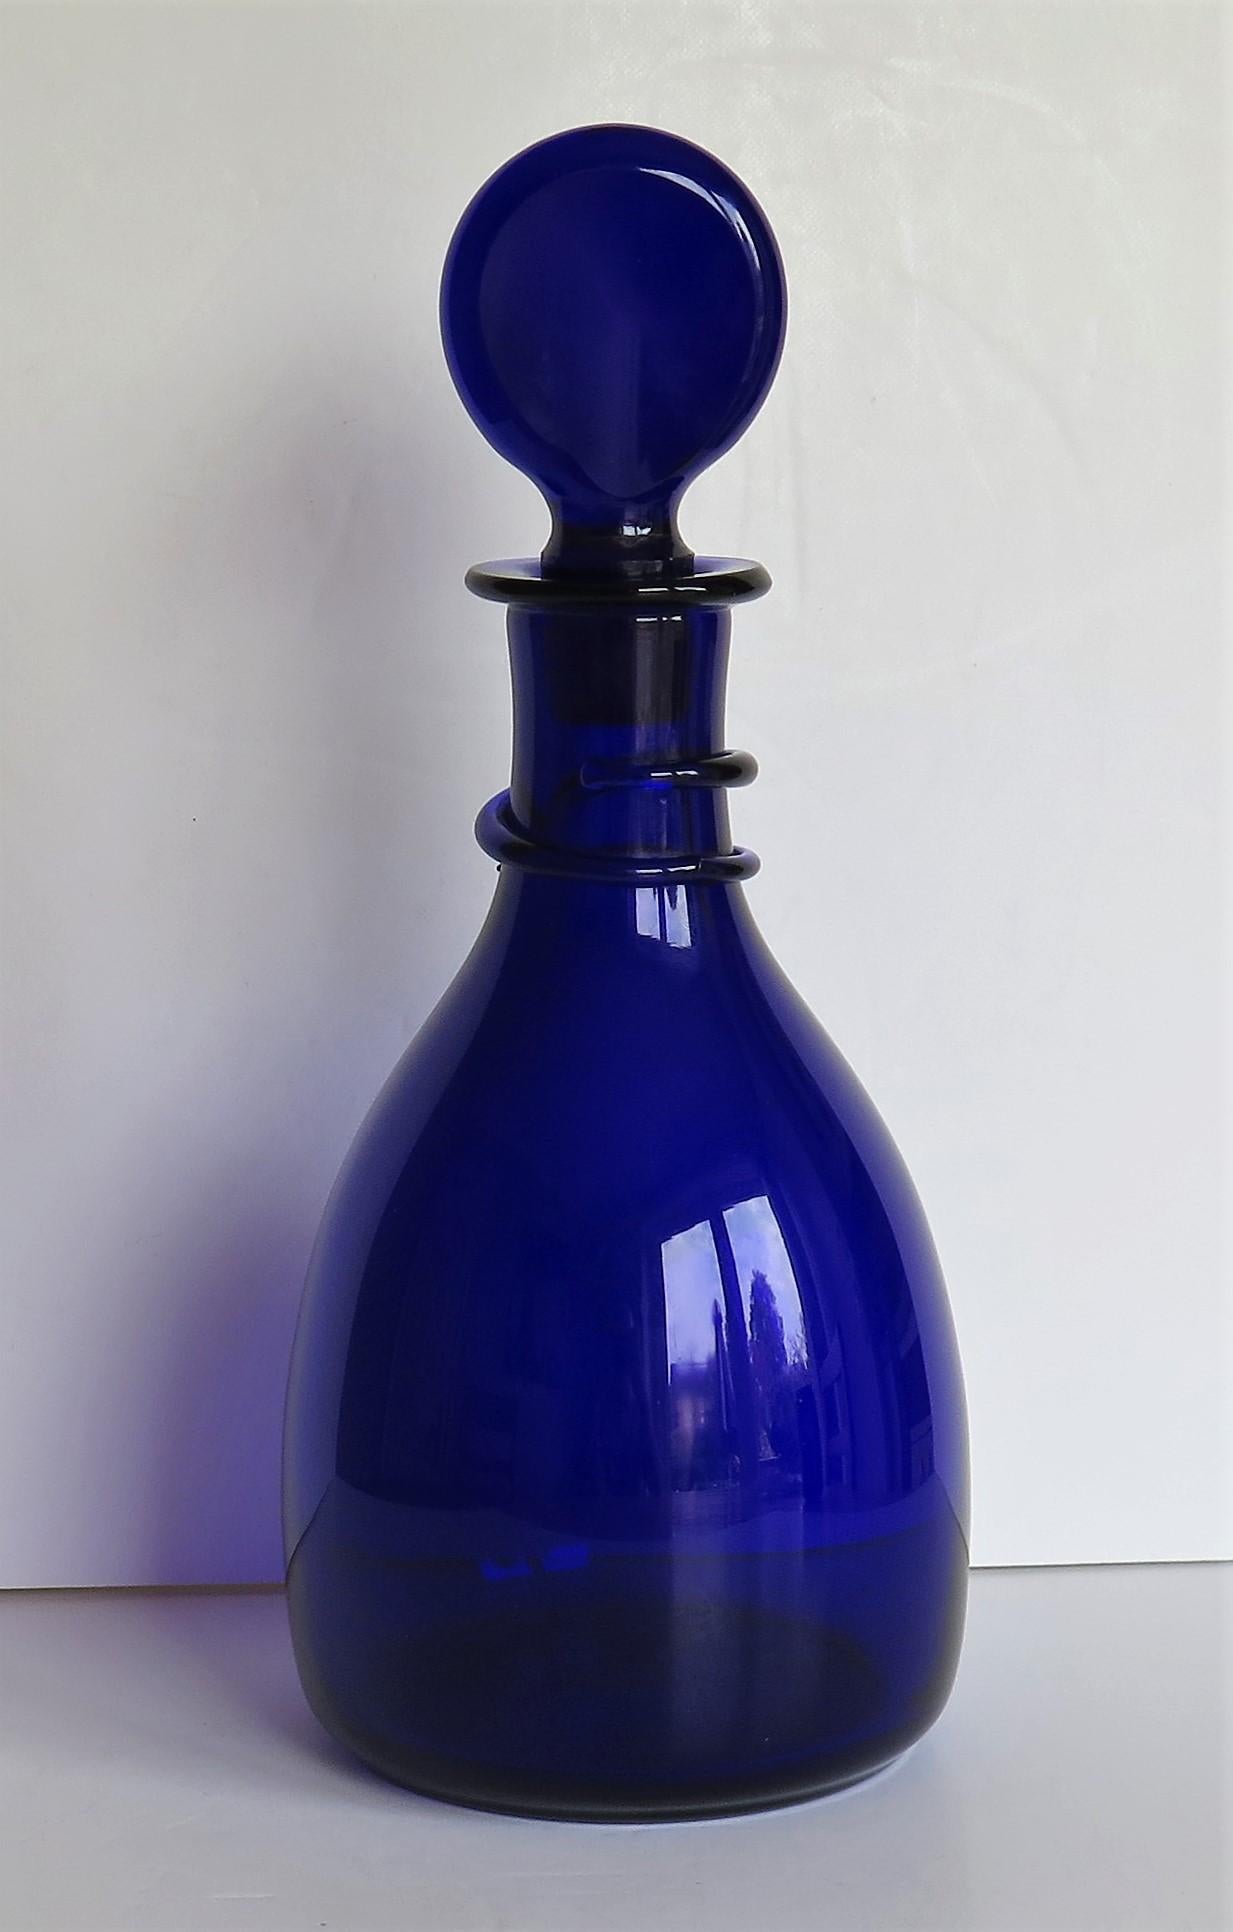 This is a very good hand blown bristol blue glass decanter having an unusual snake trailed neck ring and complete with its original lozenge stopper, made of heavy blue lead glass, circa 1790. There is a rough pontil mark to the base from the hand